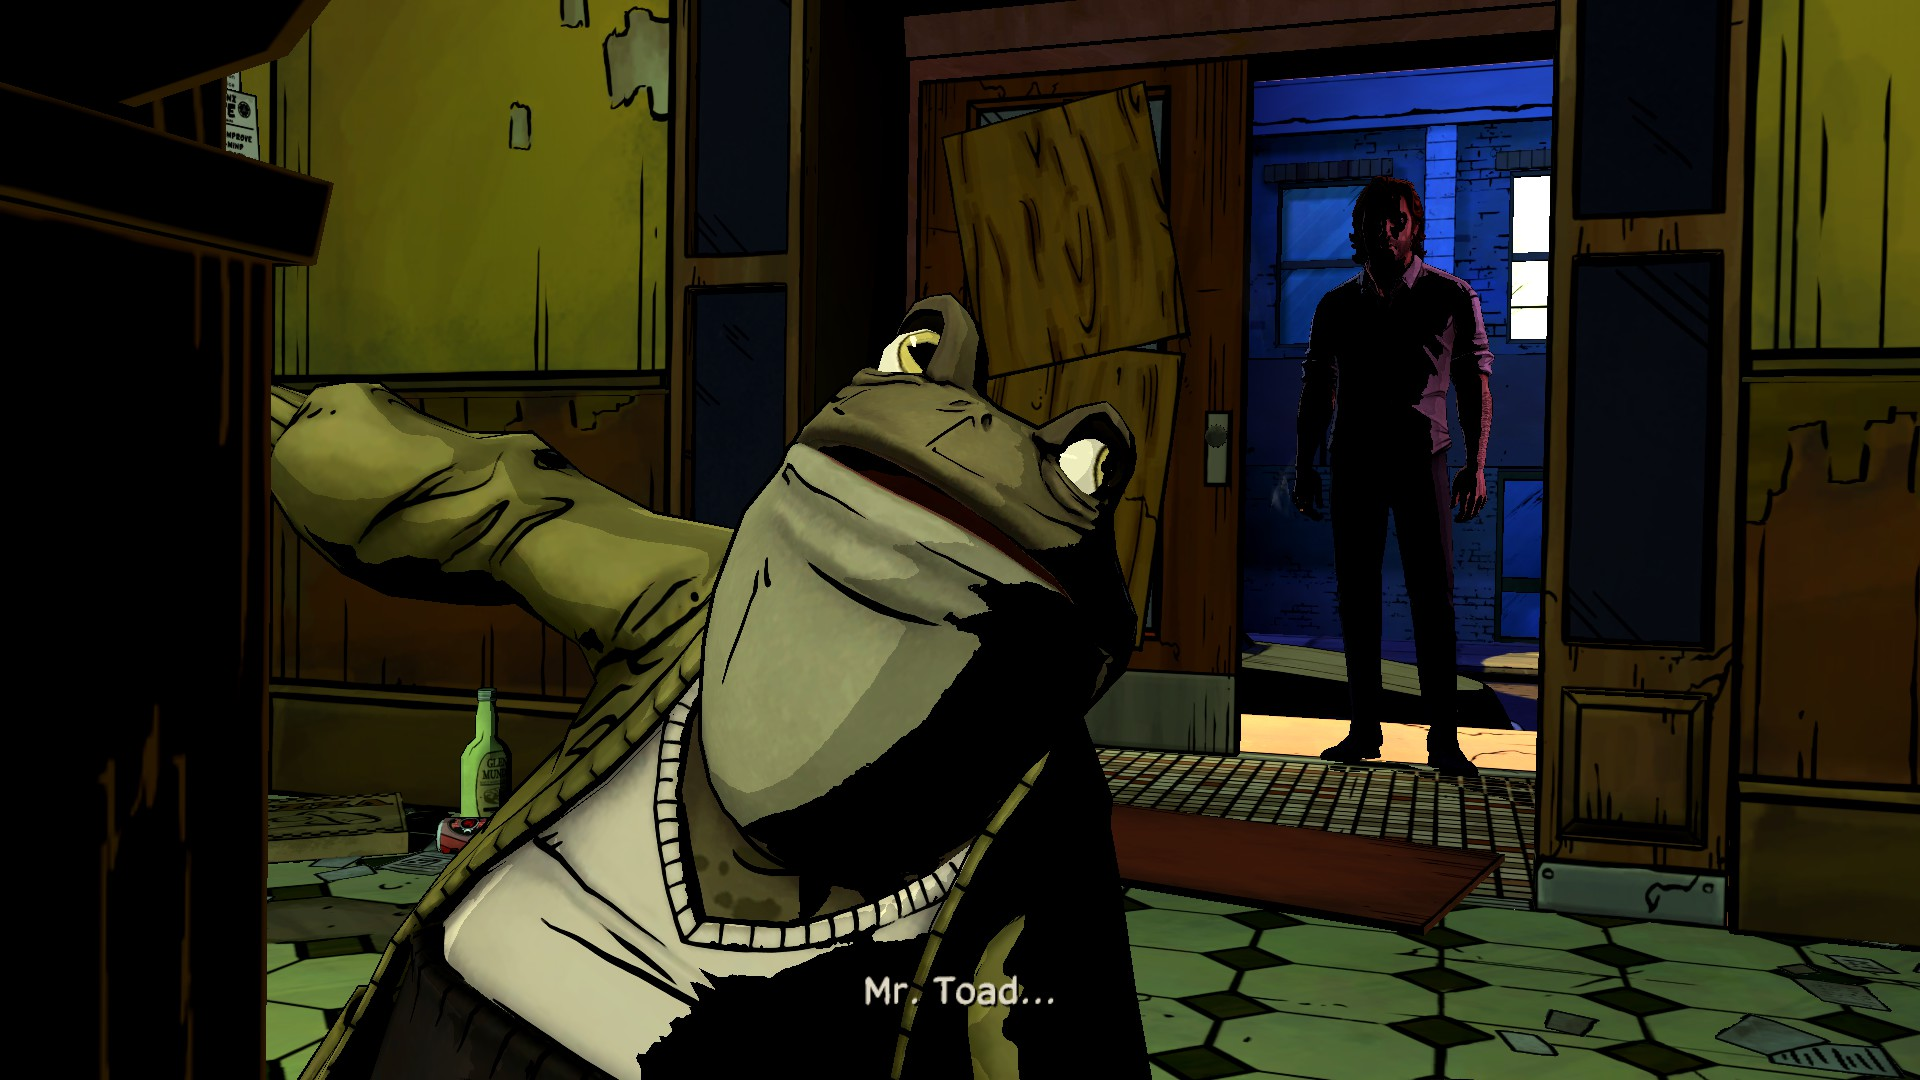 The Wolf Among Us review: A gritty noir murder mystery, with fairy